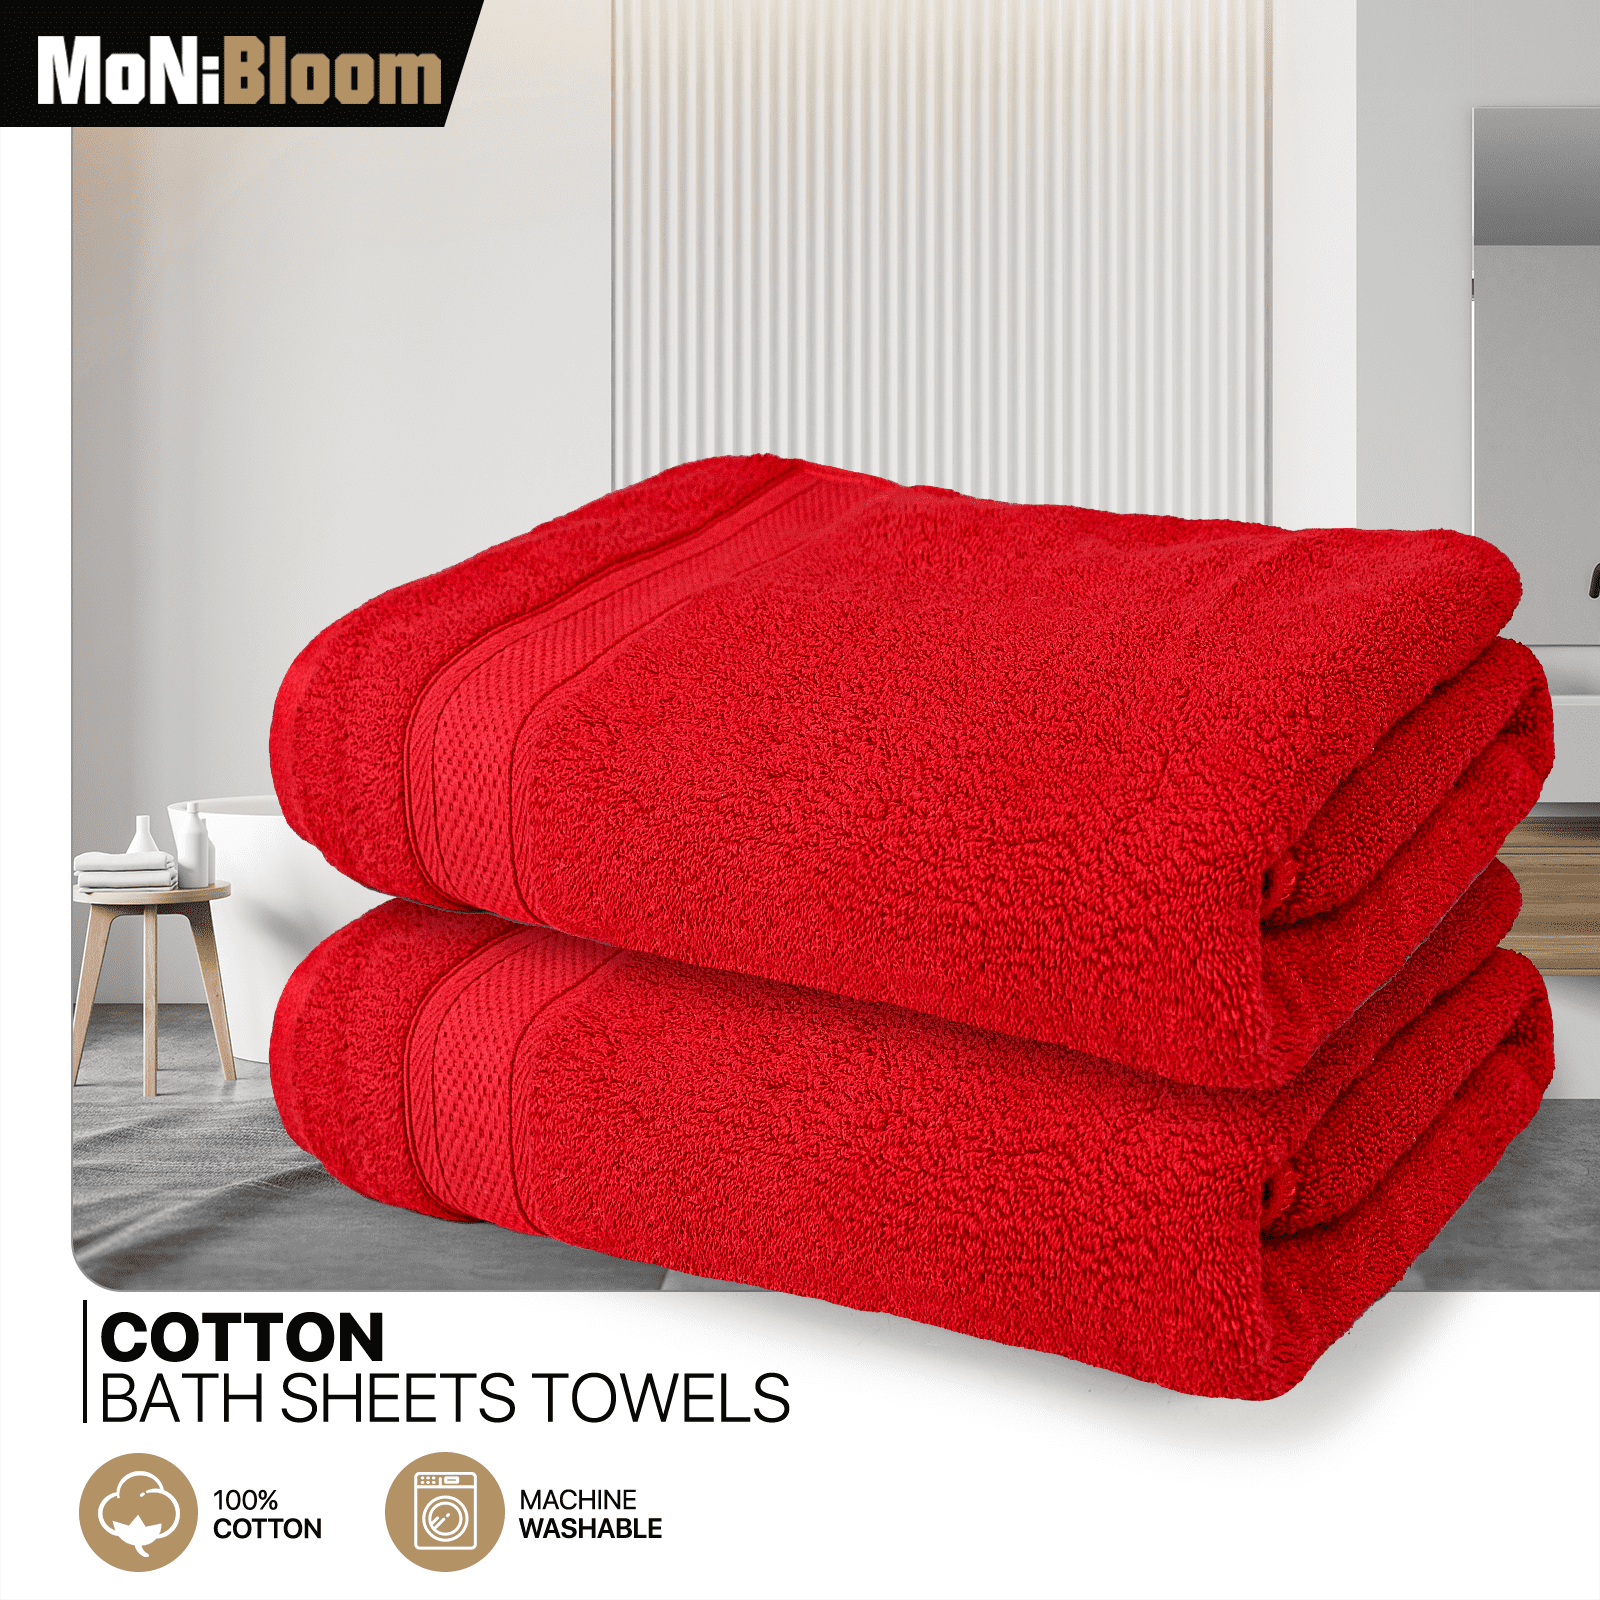 Large 100% Cotton Bath Towels Super Large Soft High Absorption And Quick  Drying Hotel Big Bath Towel Luxury Bath Sheet For Home - AliExpress